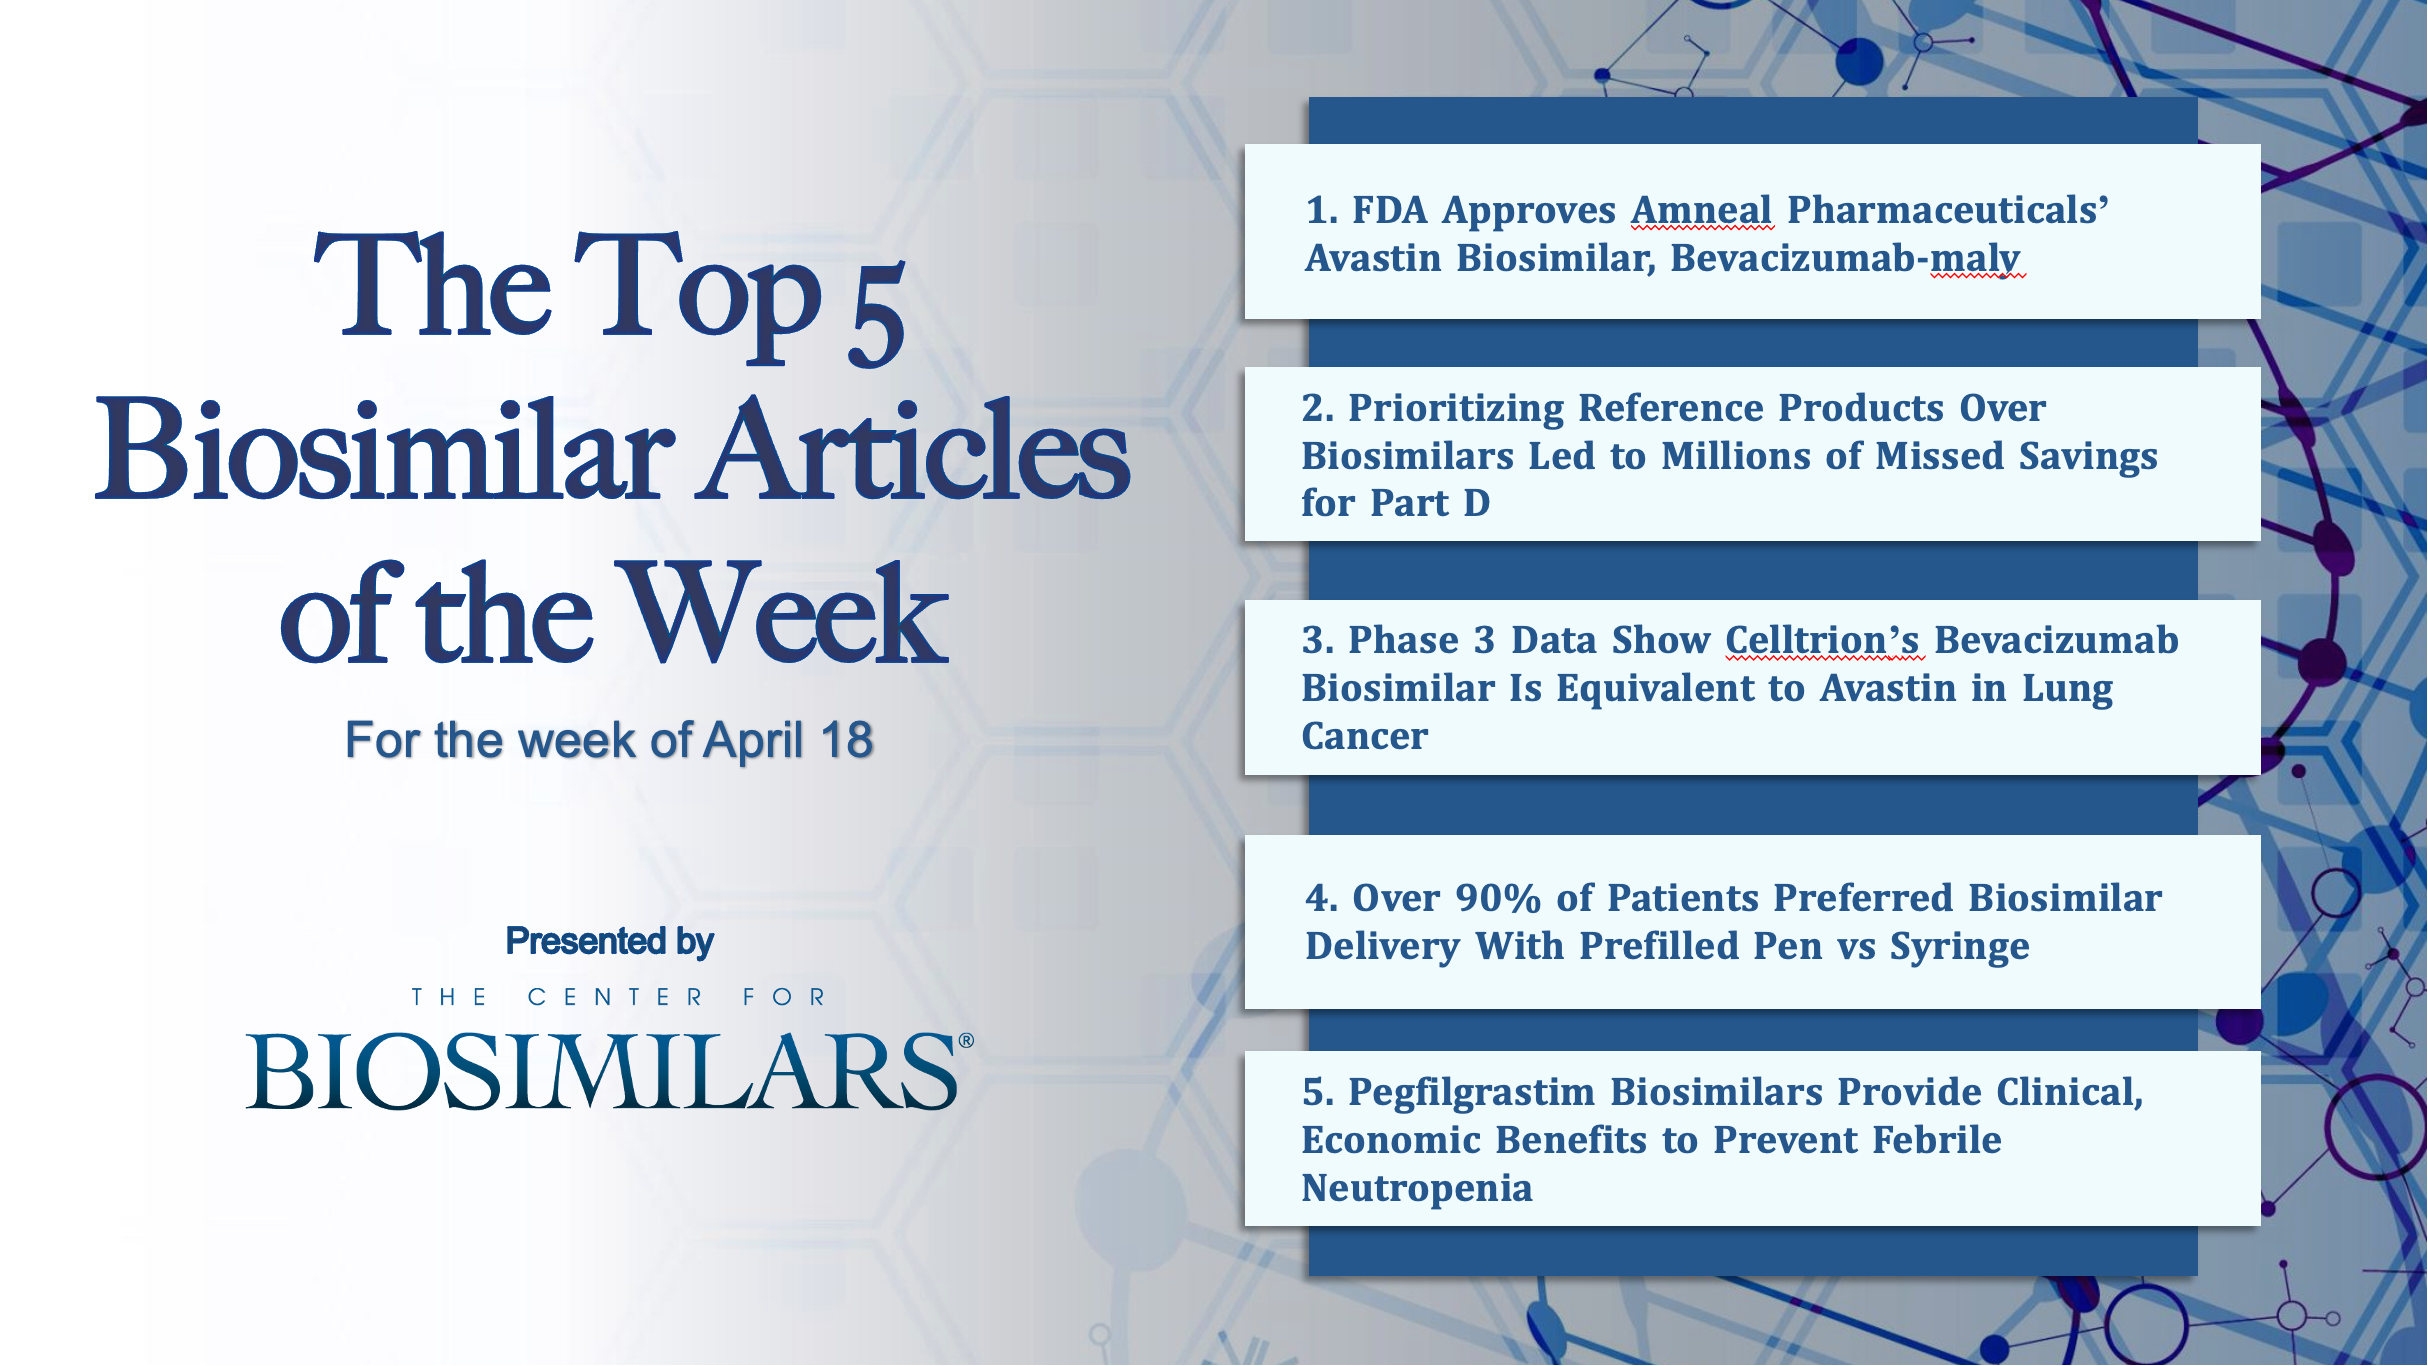 Here are the top 5 biosimilar articles for the week of April 18, 2022.